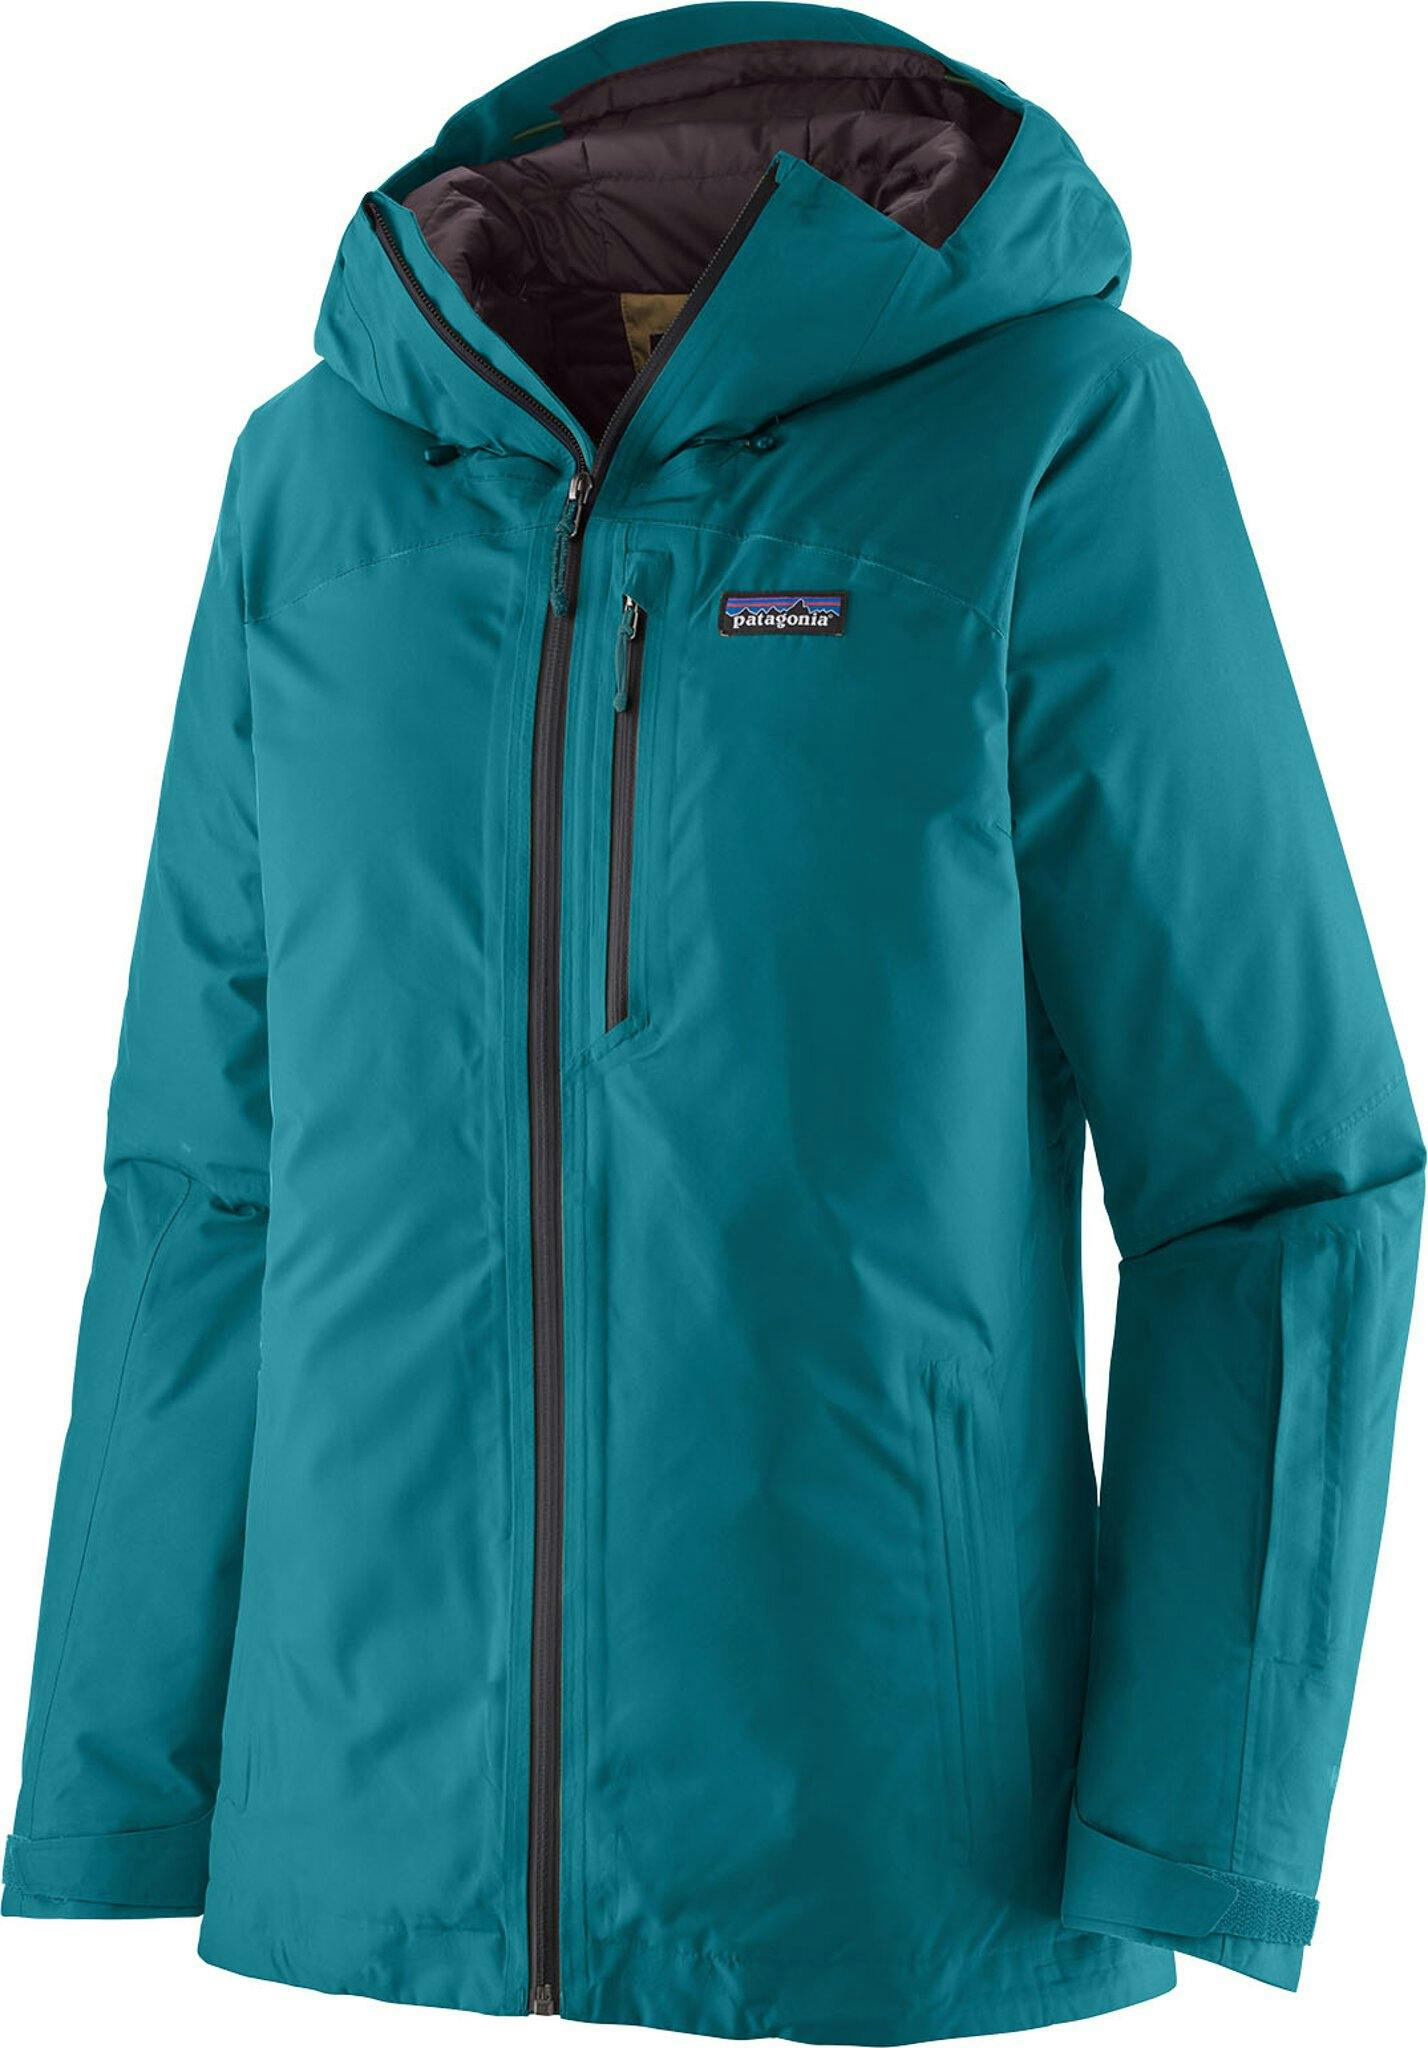 Product image for Insulated Powder Town Jacket - Women's